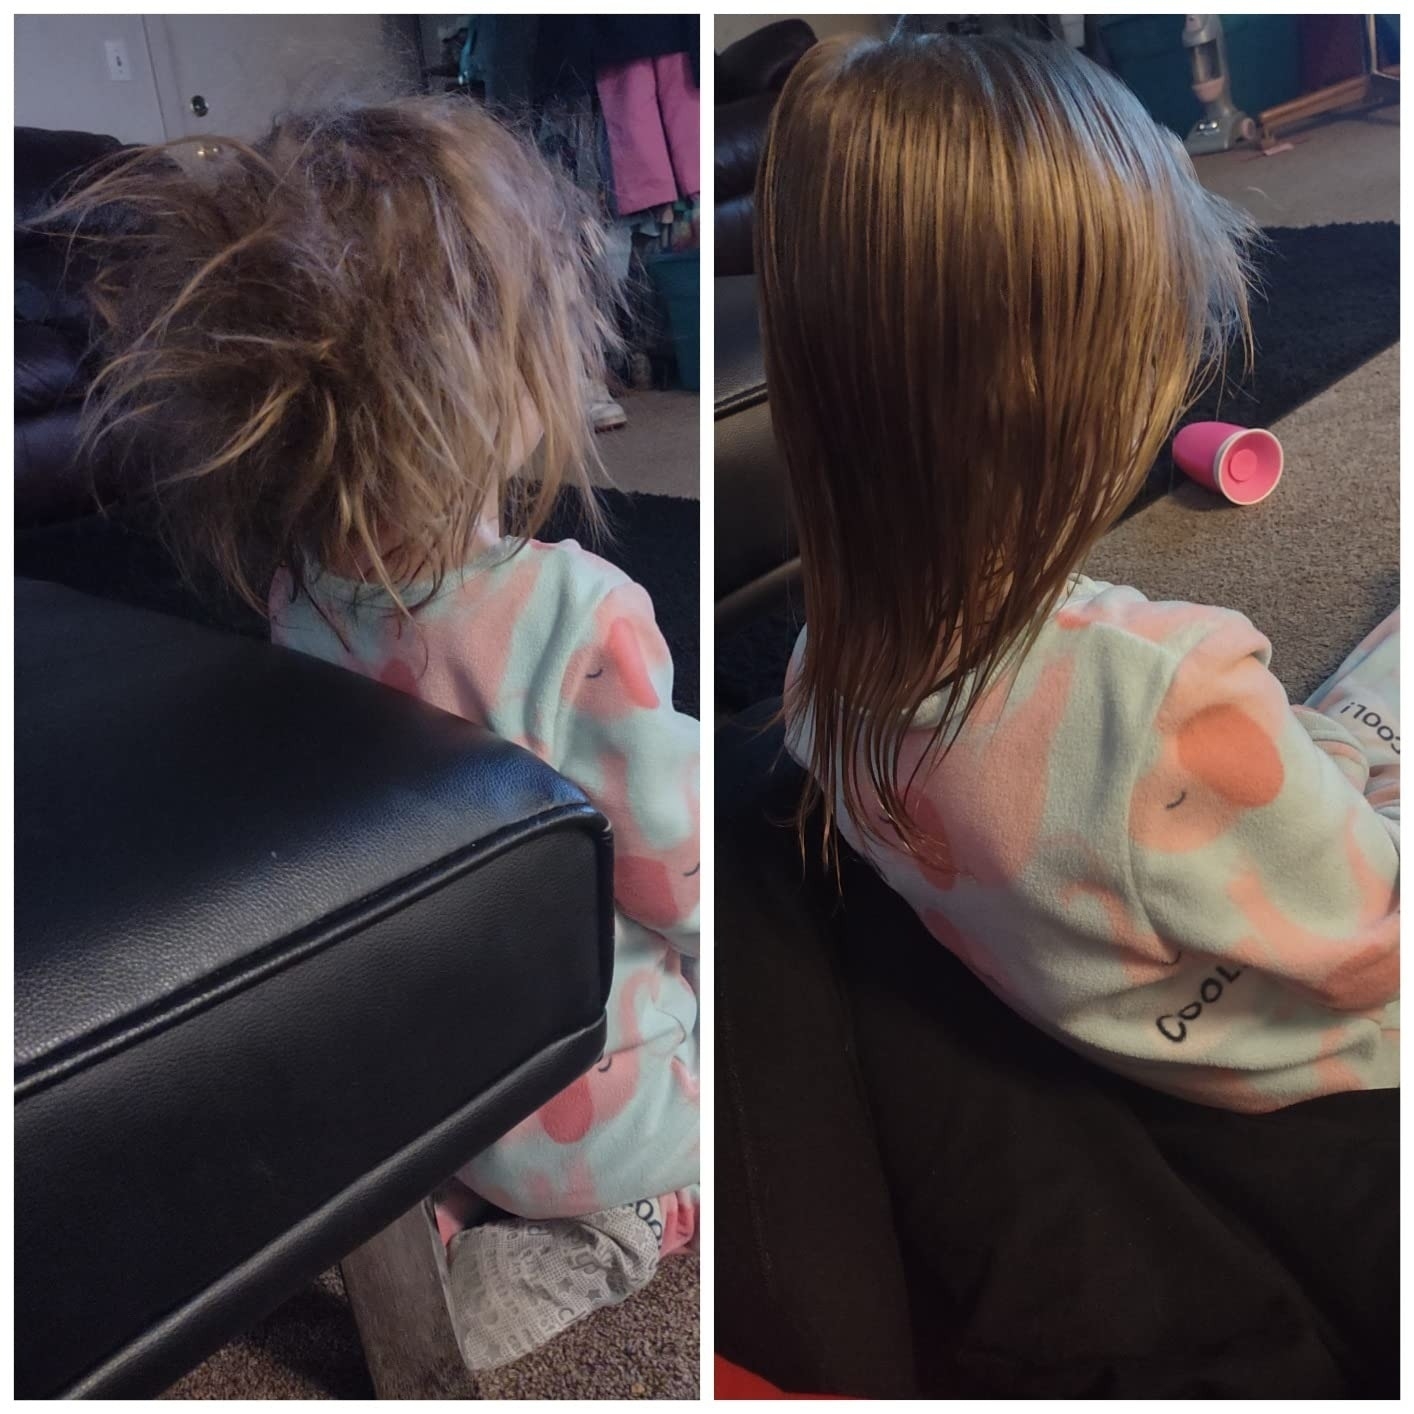 Child before and after haircut, sitting, wearing pajamas with hair transformation visible